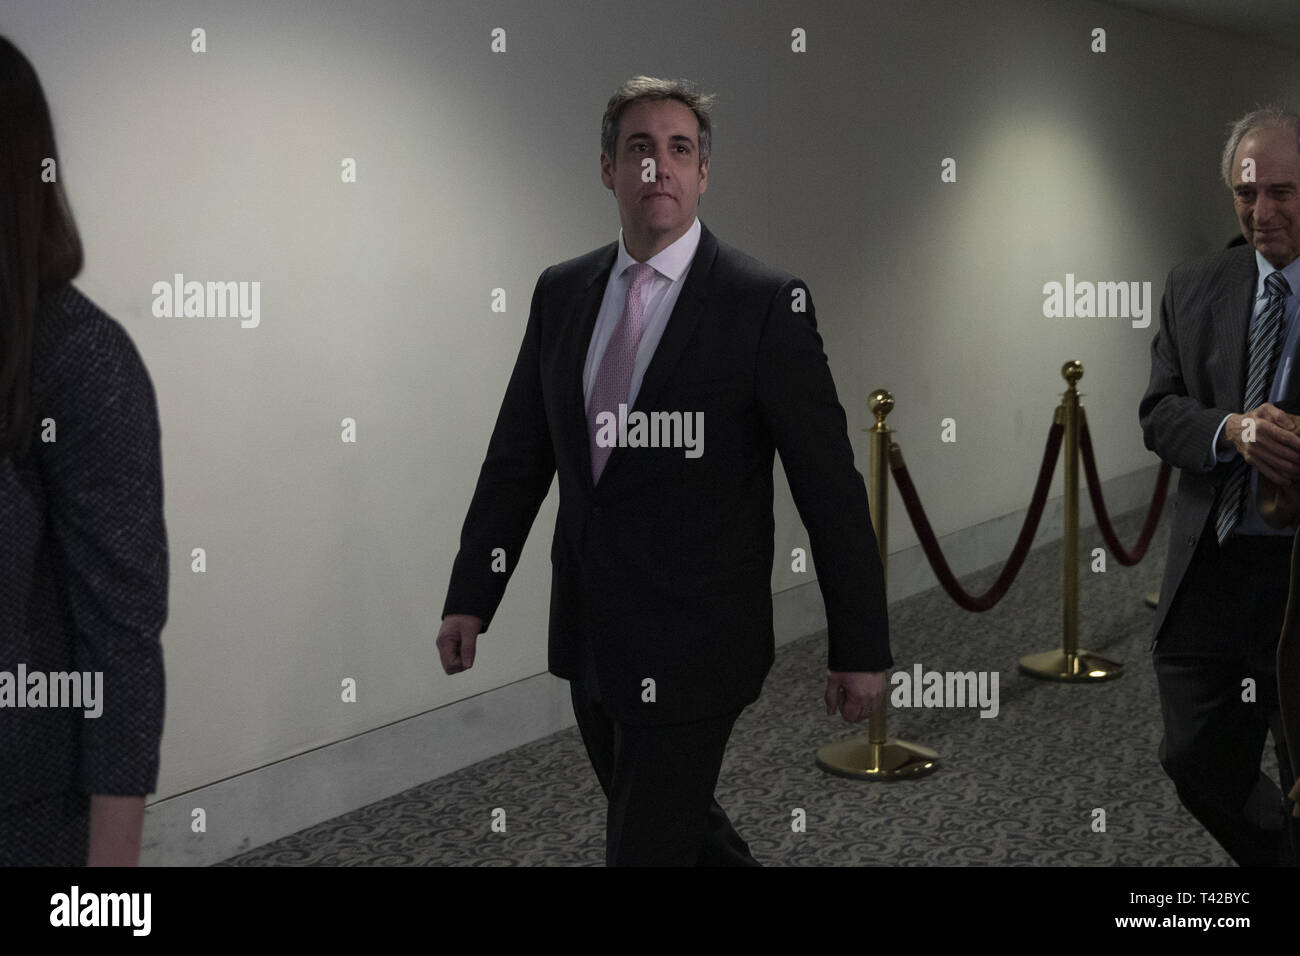 Washington, District of Columbia, USA. 26th Feb, 2019. Michael Cohen, former personal lawyer to U.S. President Donald Trump arrives on Capitol Hill for a closed-door hearing in Washington, DC on February 26, 2019. Cohen is expected to share details of his work on behalf of Trump and the Trump organization with lawmakers. Cohen pled guilty to lying to congress during a 2017 interview with lawmakers. Credit: Alex Edelman/ZUMA Wire/Alamy Live News Stock Photo